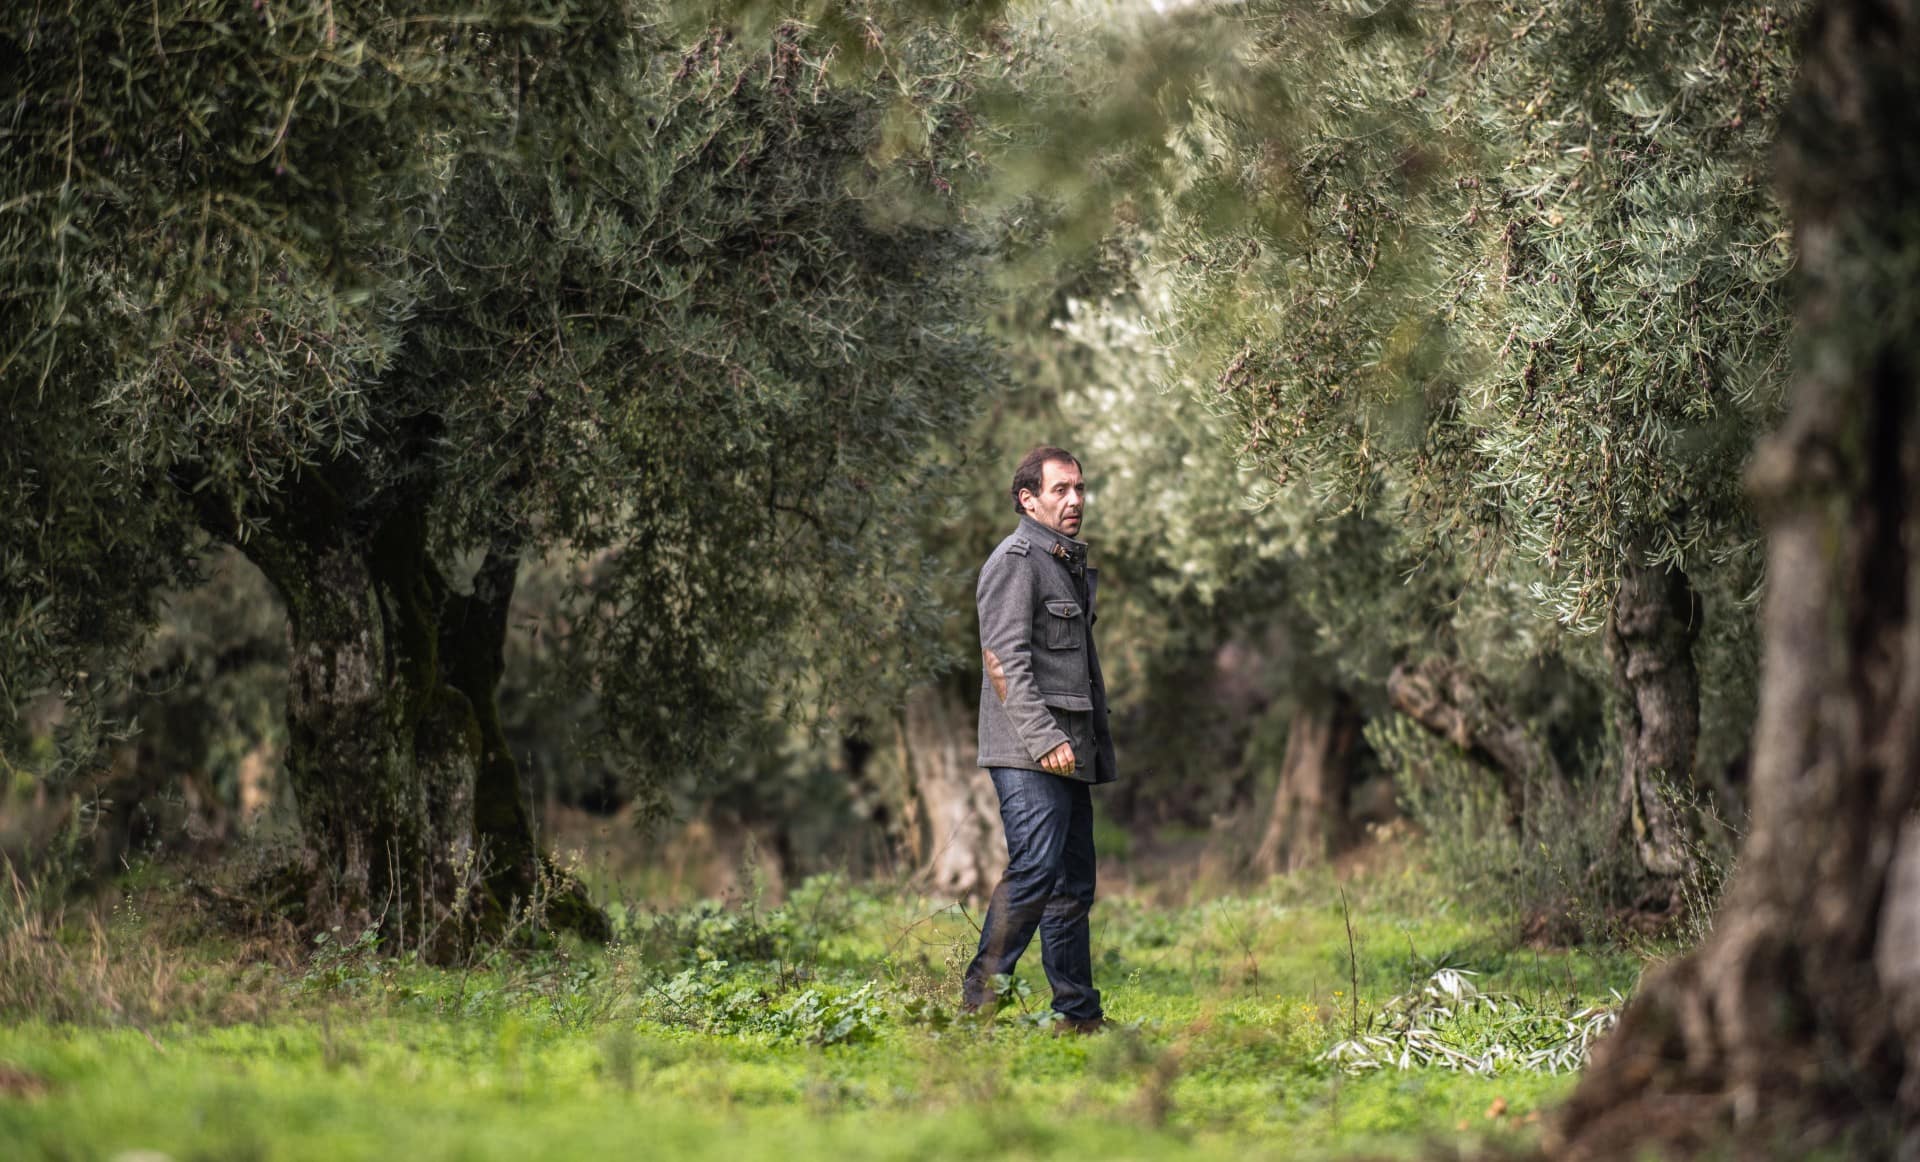 europe-the-best-olive-oils-competitions-production-portuguese-producers-reap-benefits-of-record-harvest-at-world-competition-olive-oil-times